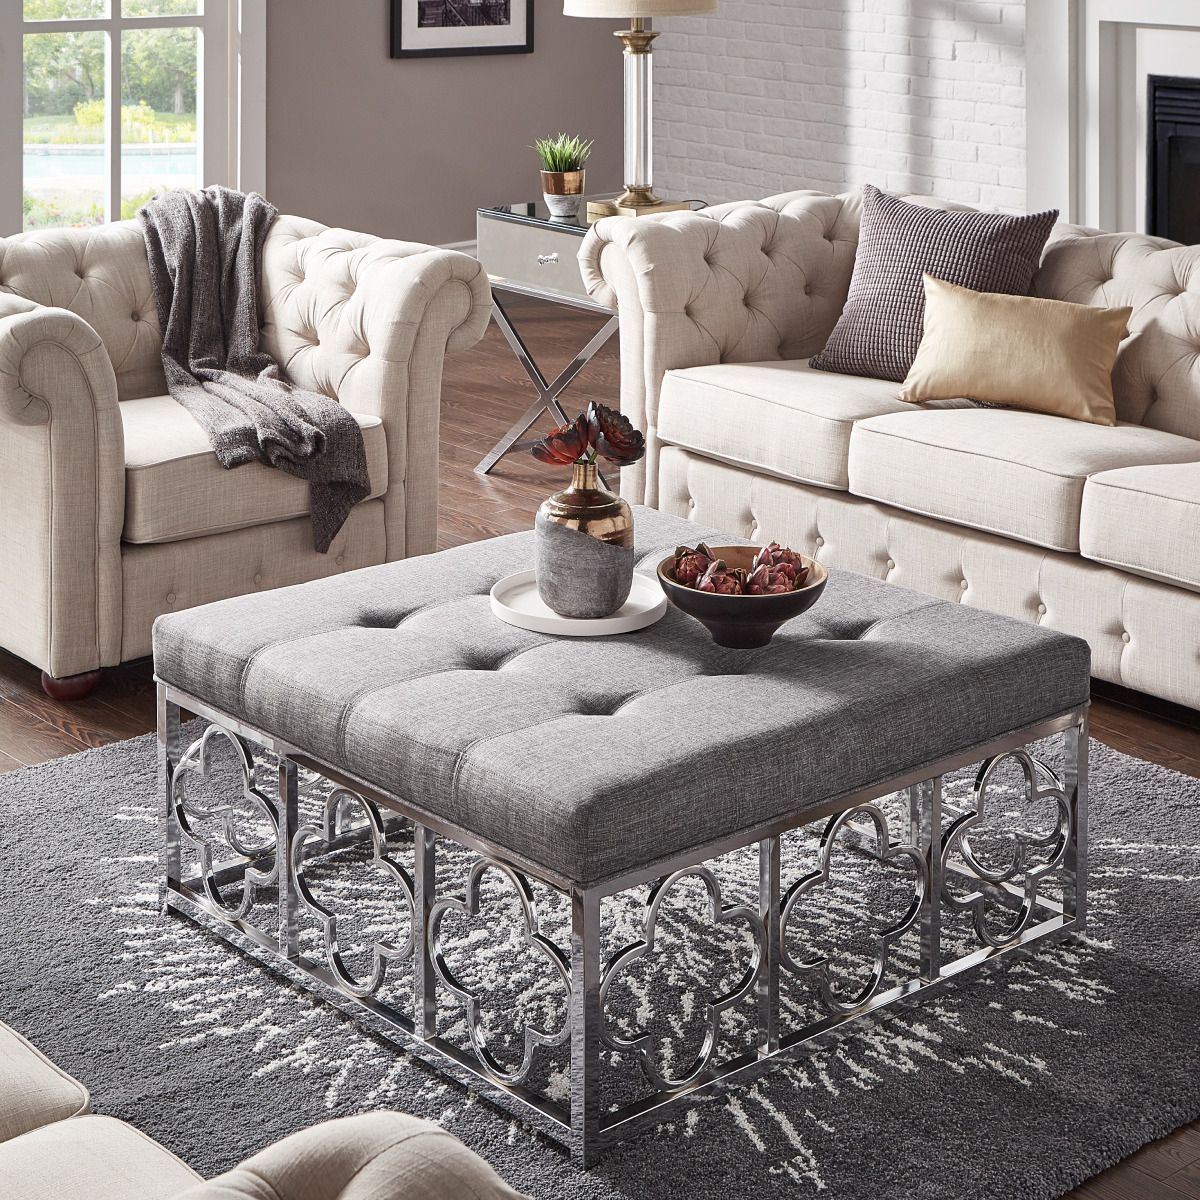 Weston Home Libby Dimple Tufted Cushion Chrome Quatrefoil Base Square For Tufted Ottoman Console Tables (View 5 of 20)